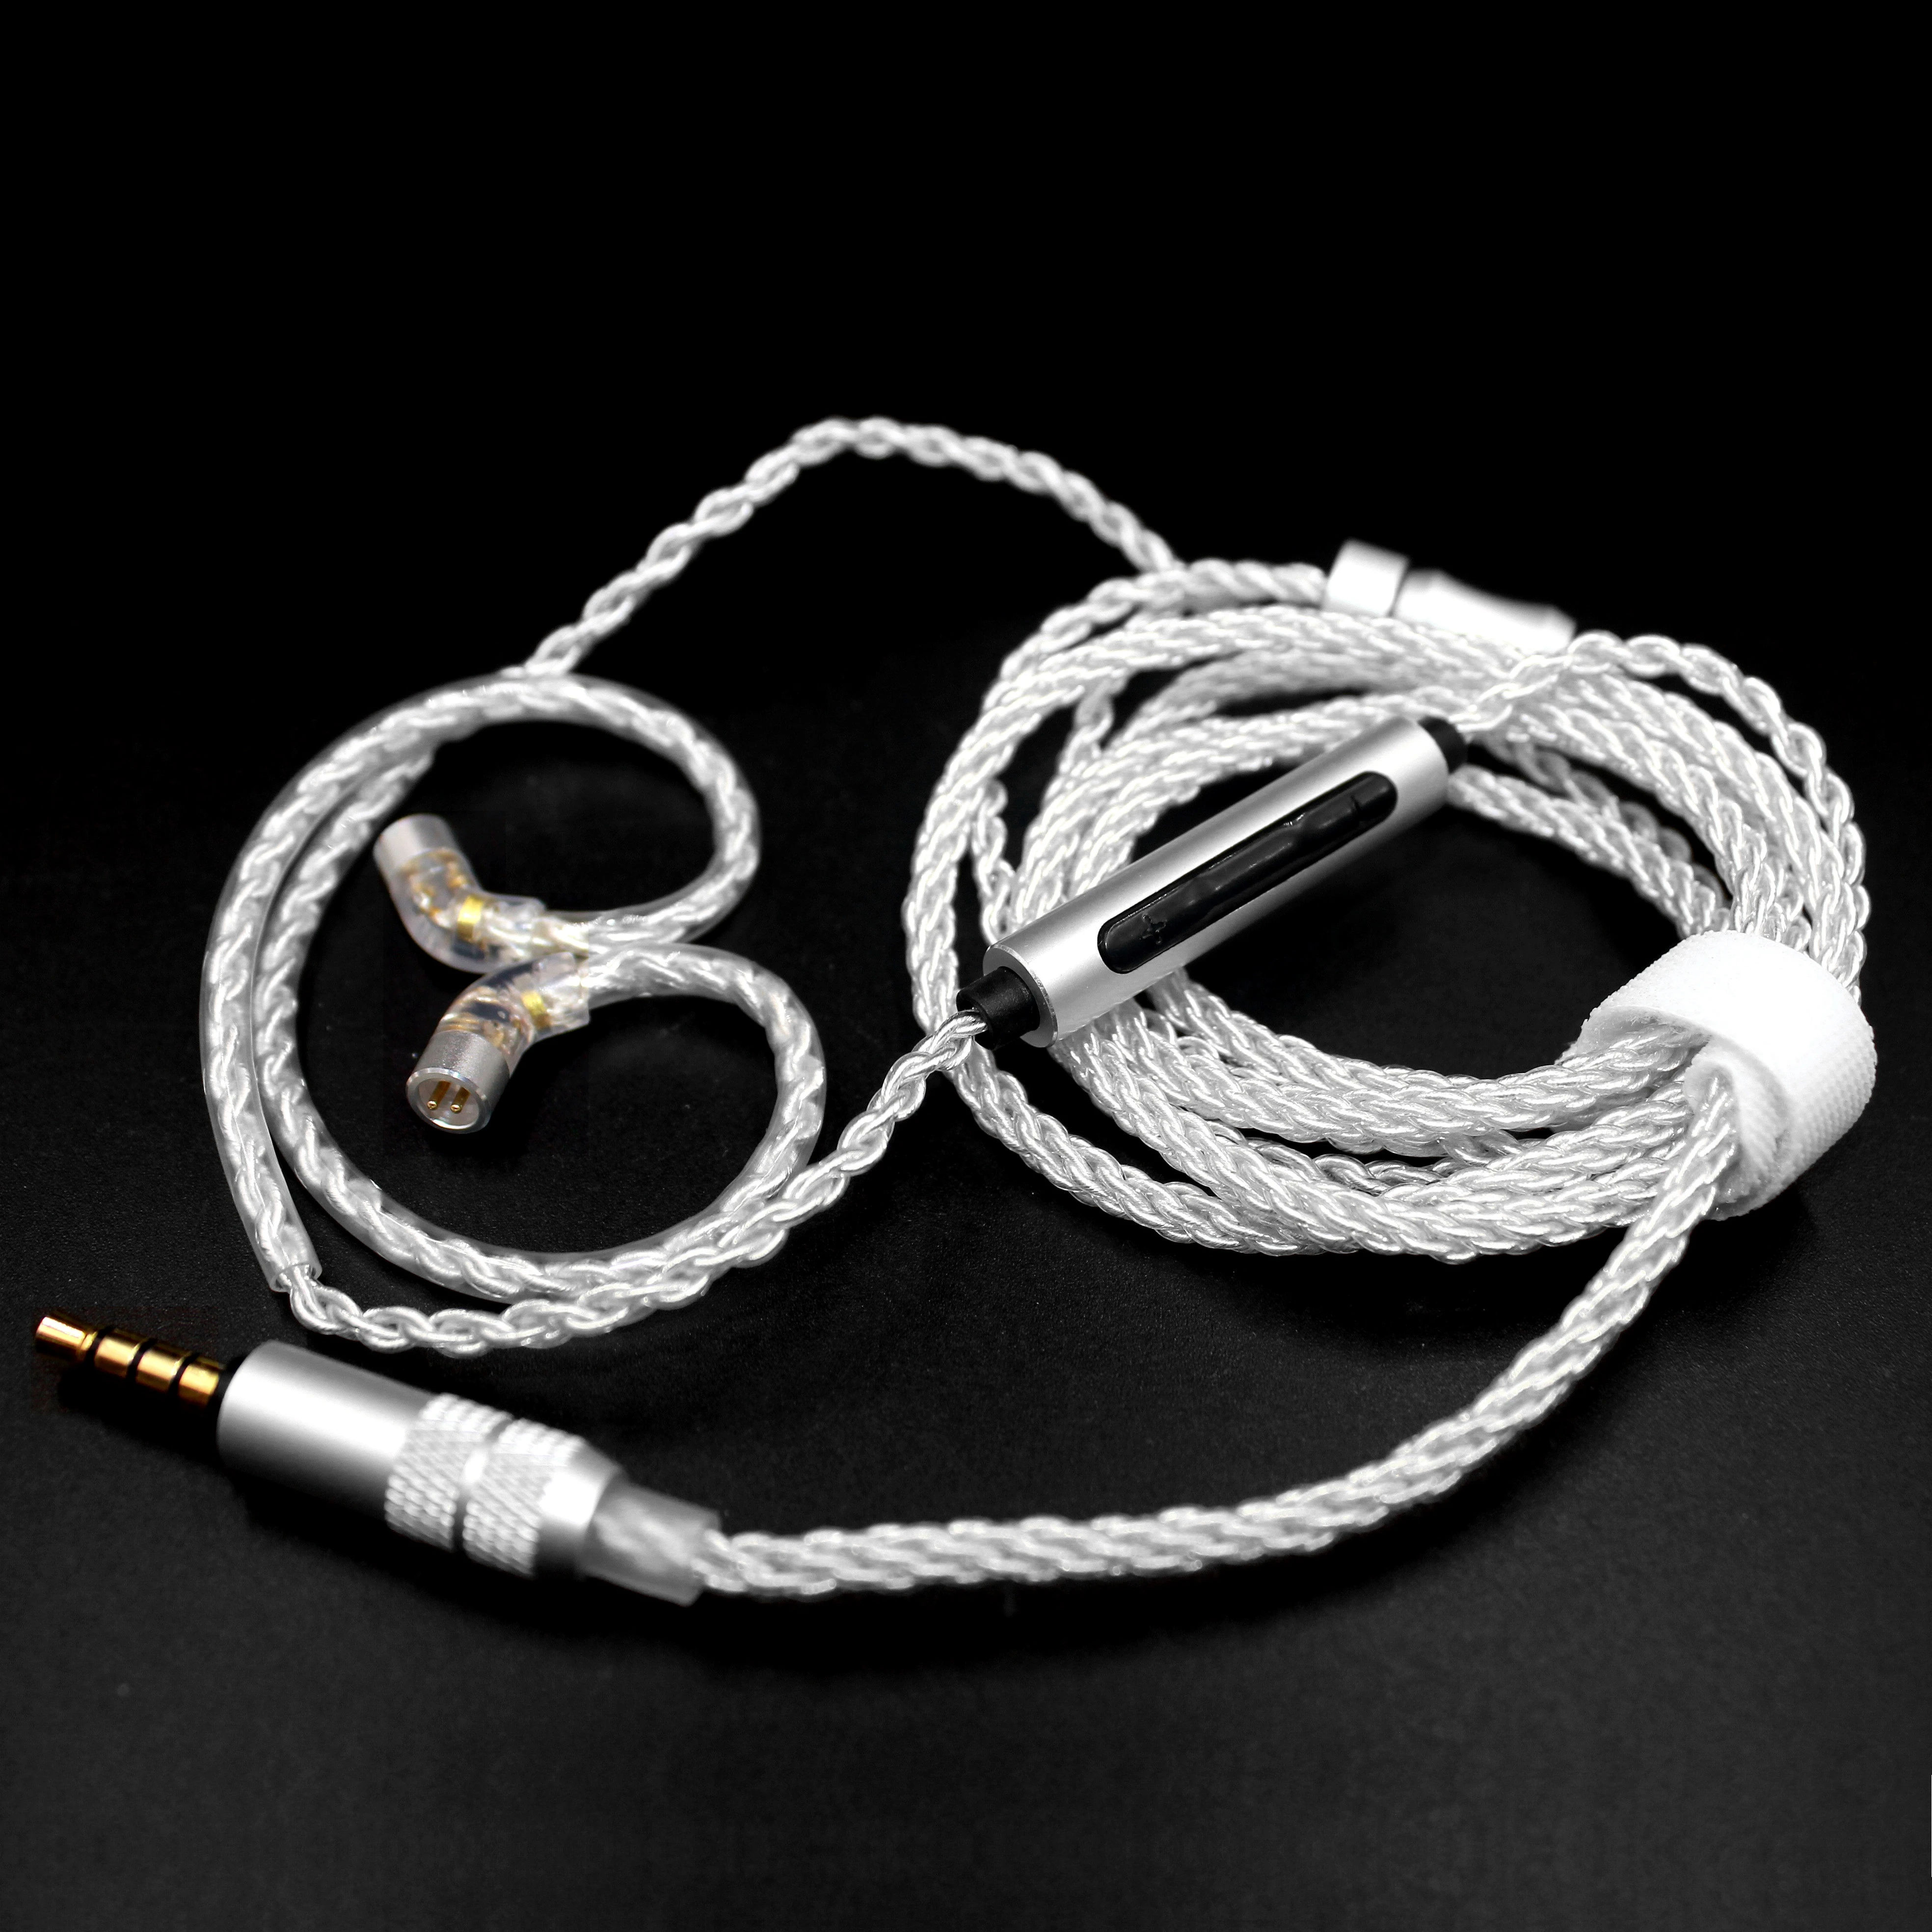 Replacement 0.78mm 2pin twisted  headphone cable with microphone and 6N OFC copper wire plated silver line  headphones cables